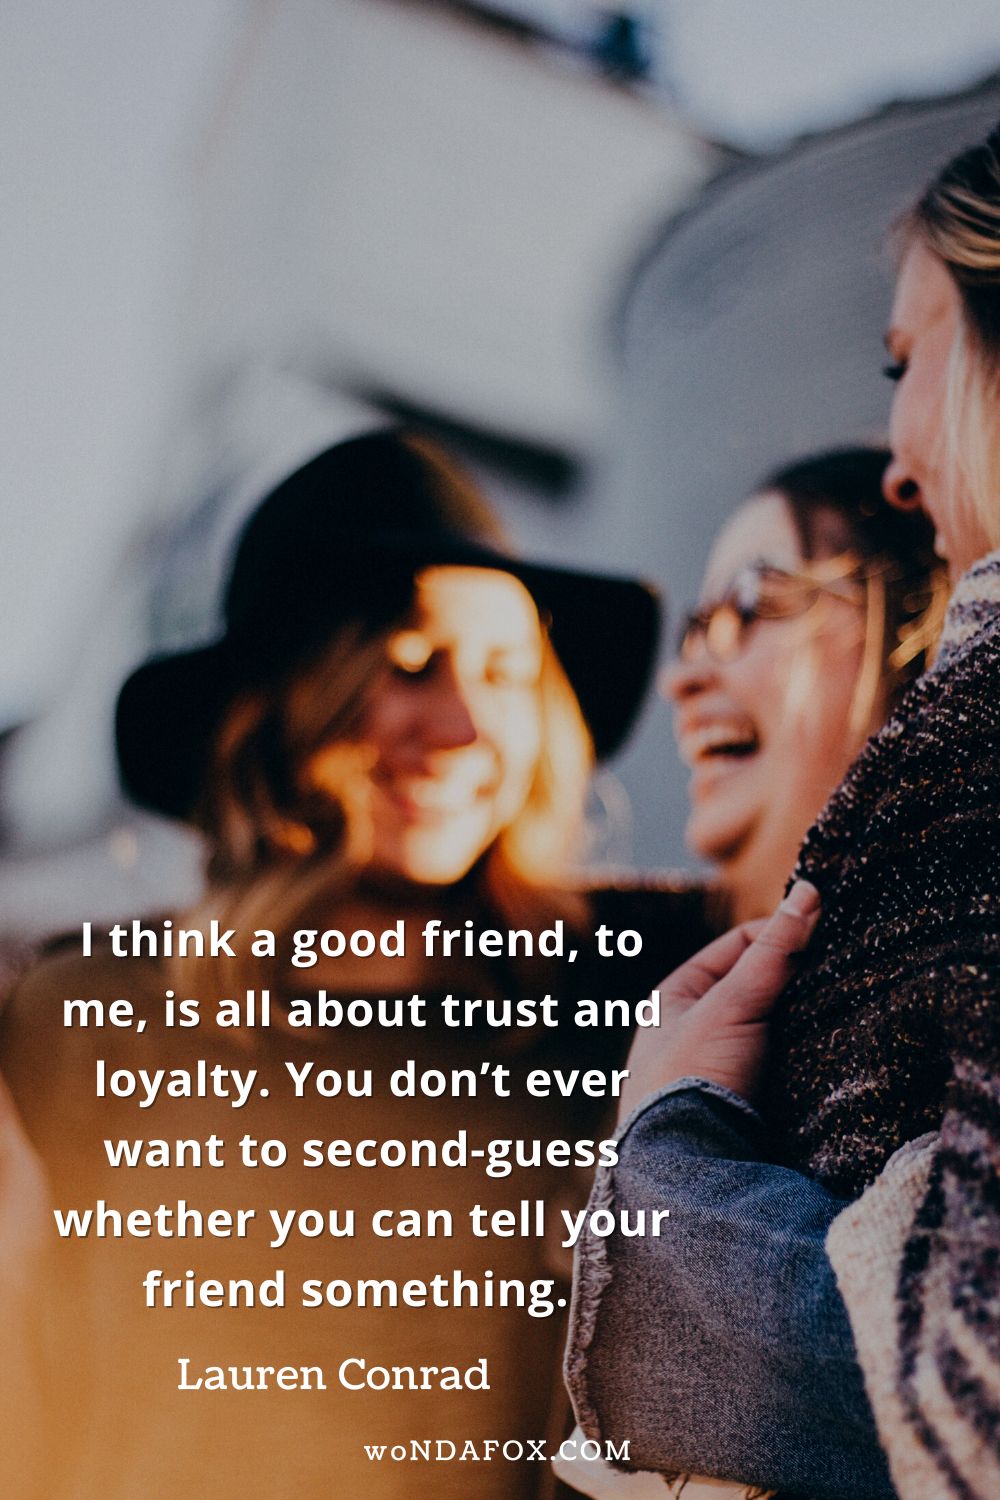 “I think a good friend, to me, is all about trust and loyalty. You don’t ever want to second-guess whether you can tell your friend something.” 